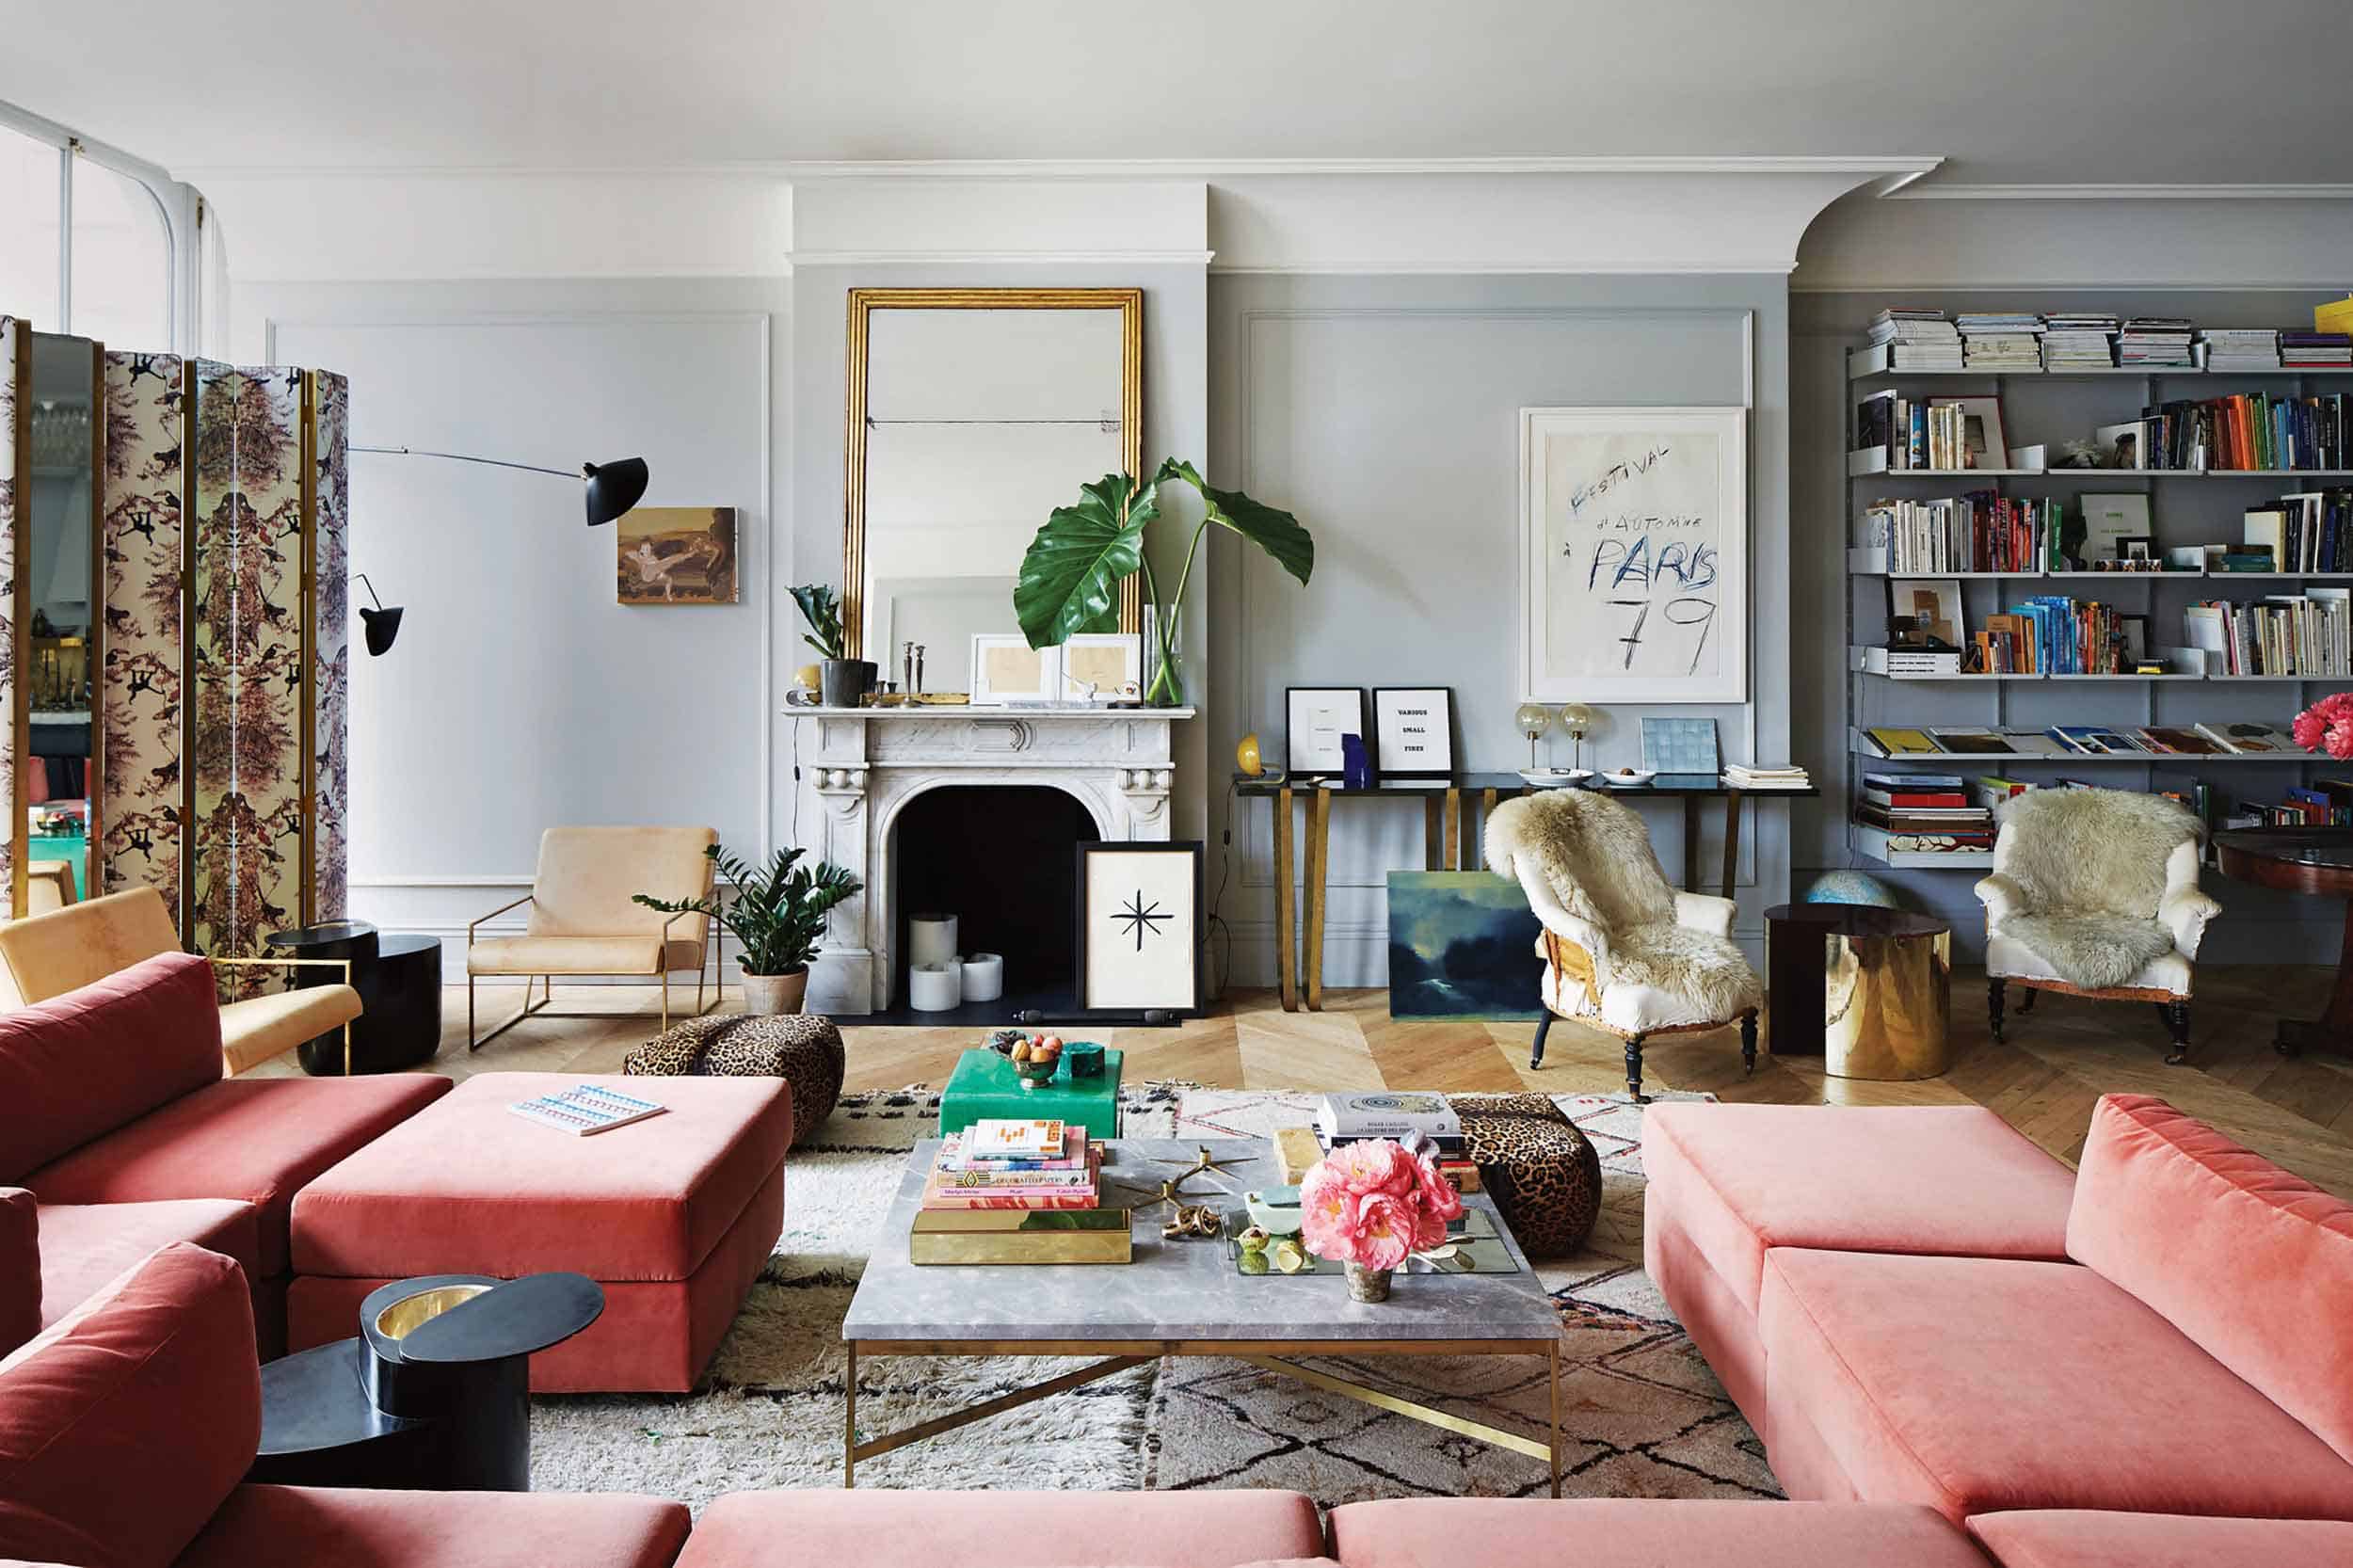 Maximalist Style in the Colors You Like